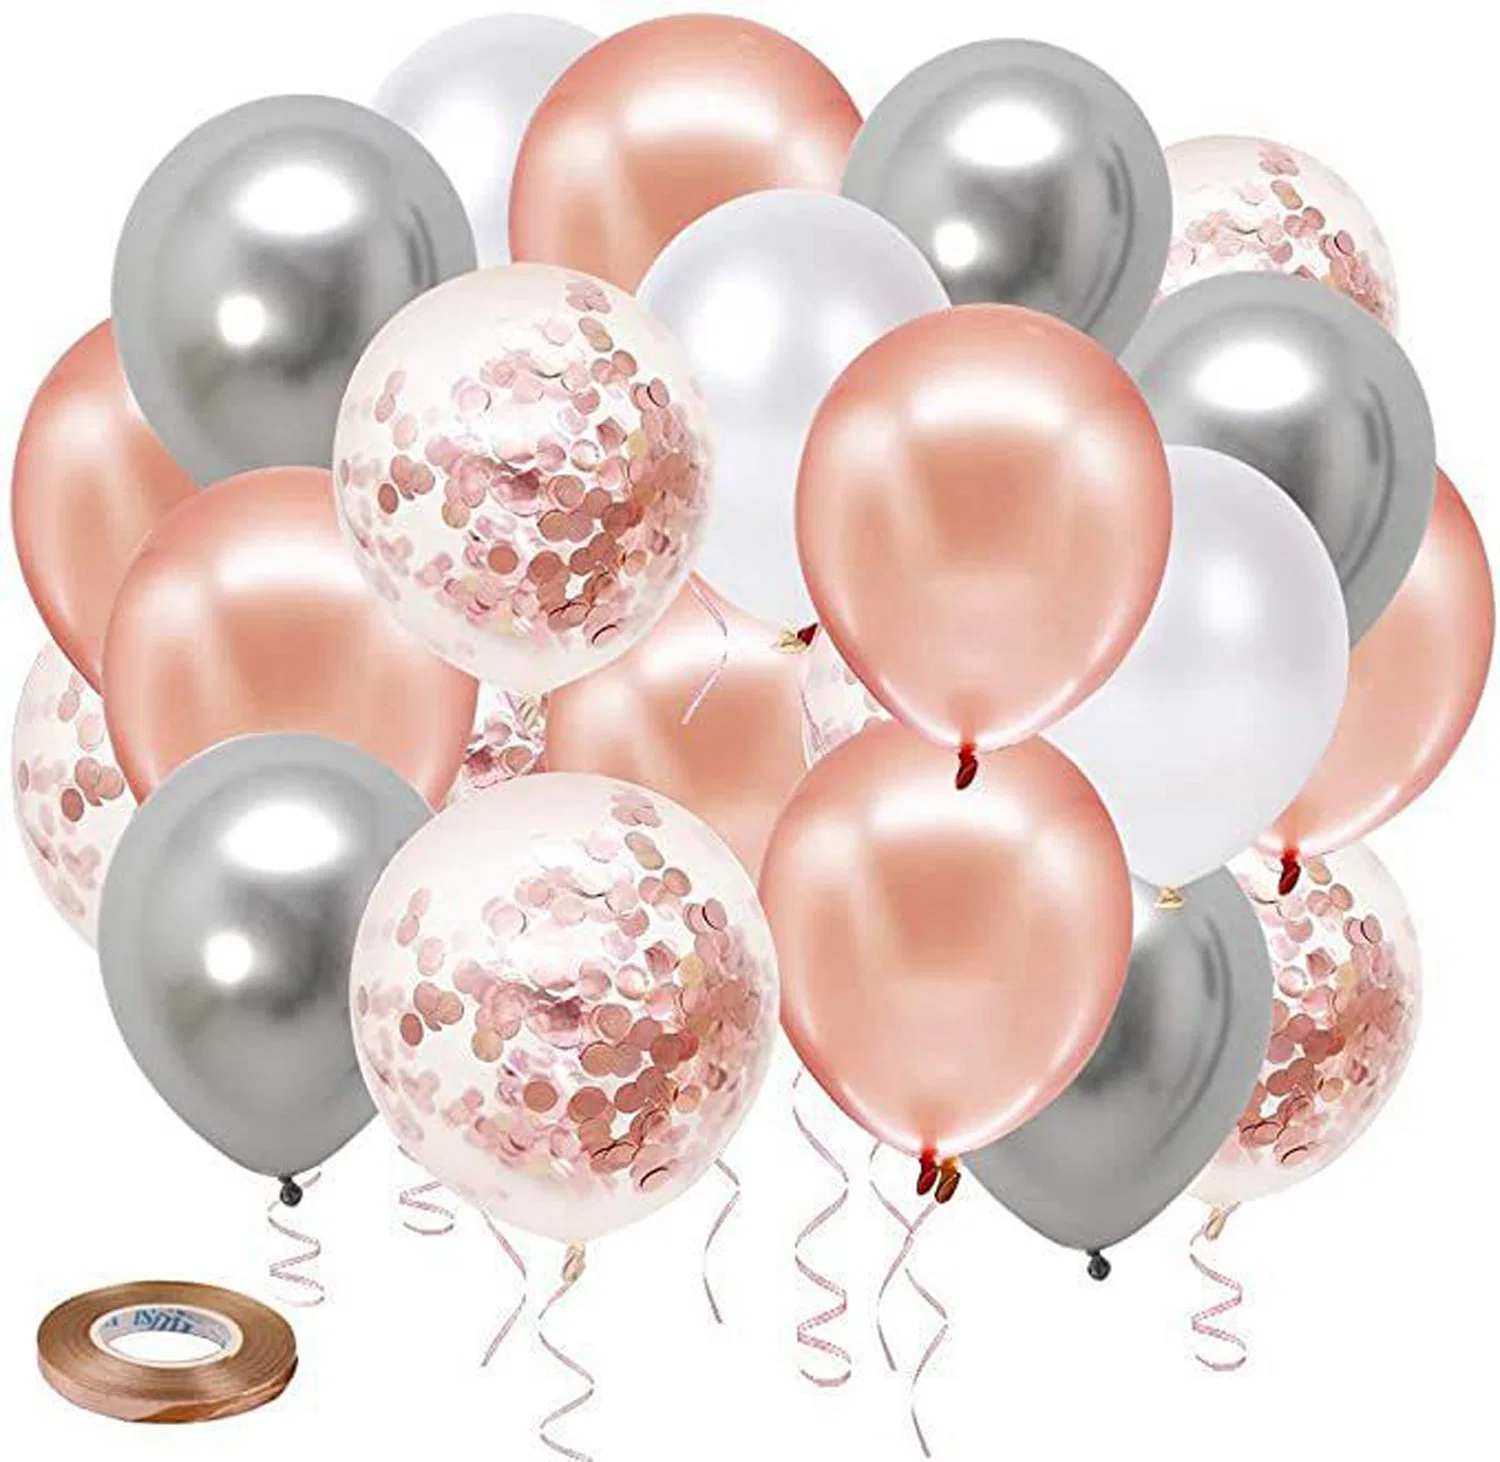 60 Pack White Gold Balloon 12 Inch Birthday Rose Gold Confetti Latex Balloons for Party Wedding Bridal Shower Decorations